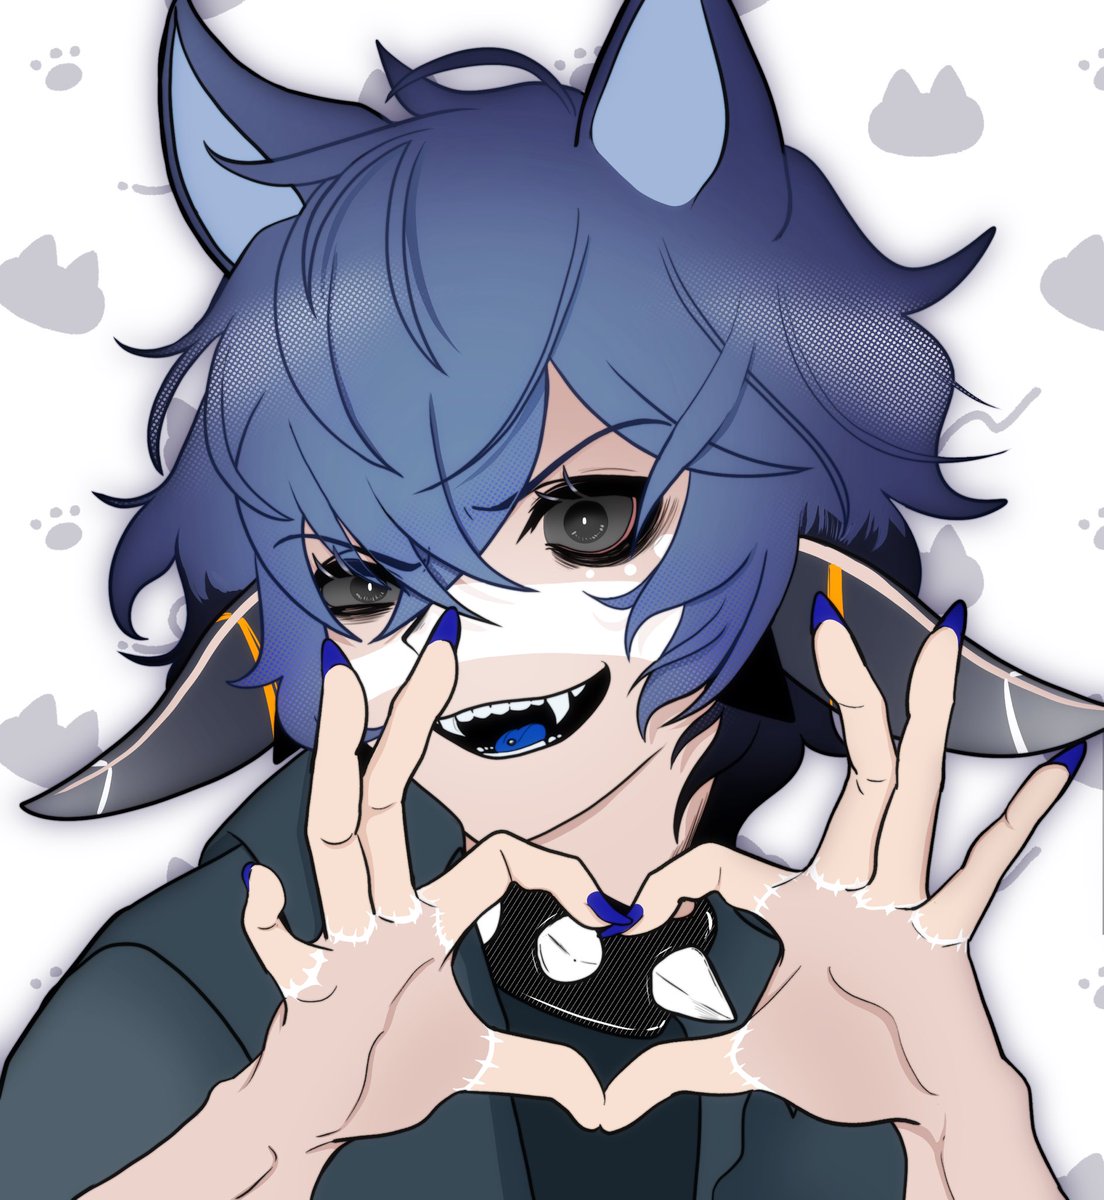 ☁️☁️ RAFFLE TIME ! ☁️☁️

Receive an icon, drawn by me! 

To promote my VGEN, I’m holding this raffle! 

To enter - Like ♥️  RT🔁 Follow 🫂
4 Winners - Giveaway ends March 20th at 6pm CST

Show me your cute models! ☺️
#vtuberart #vtuber